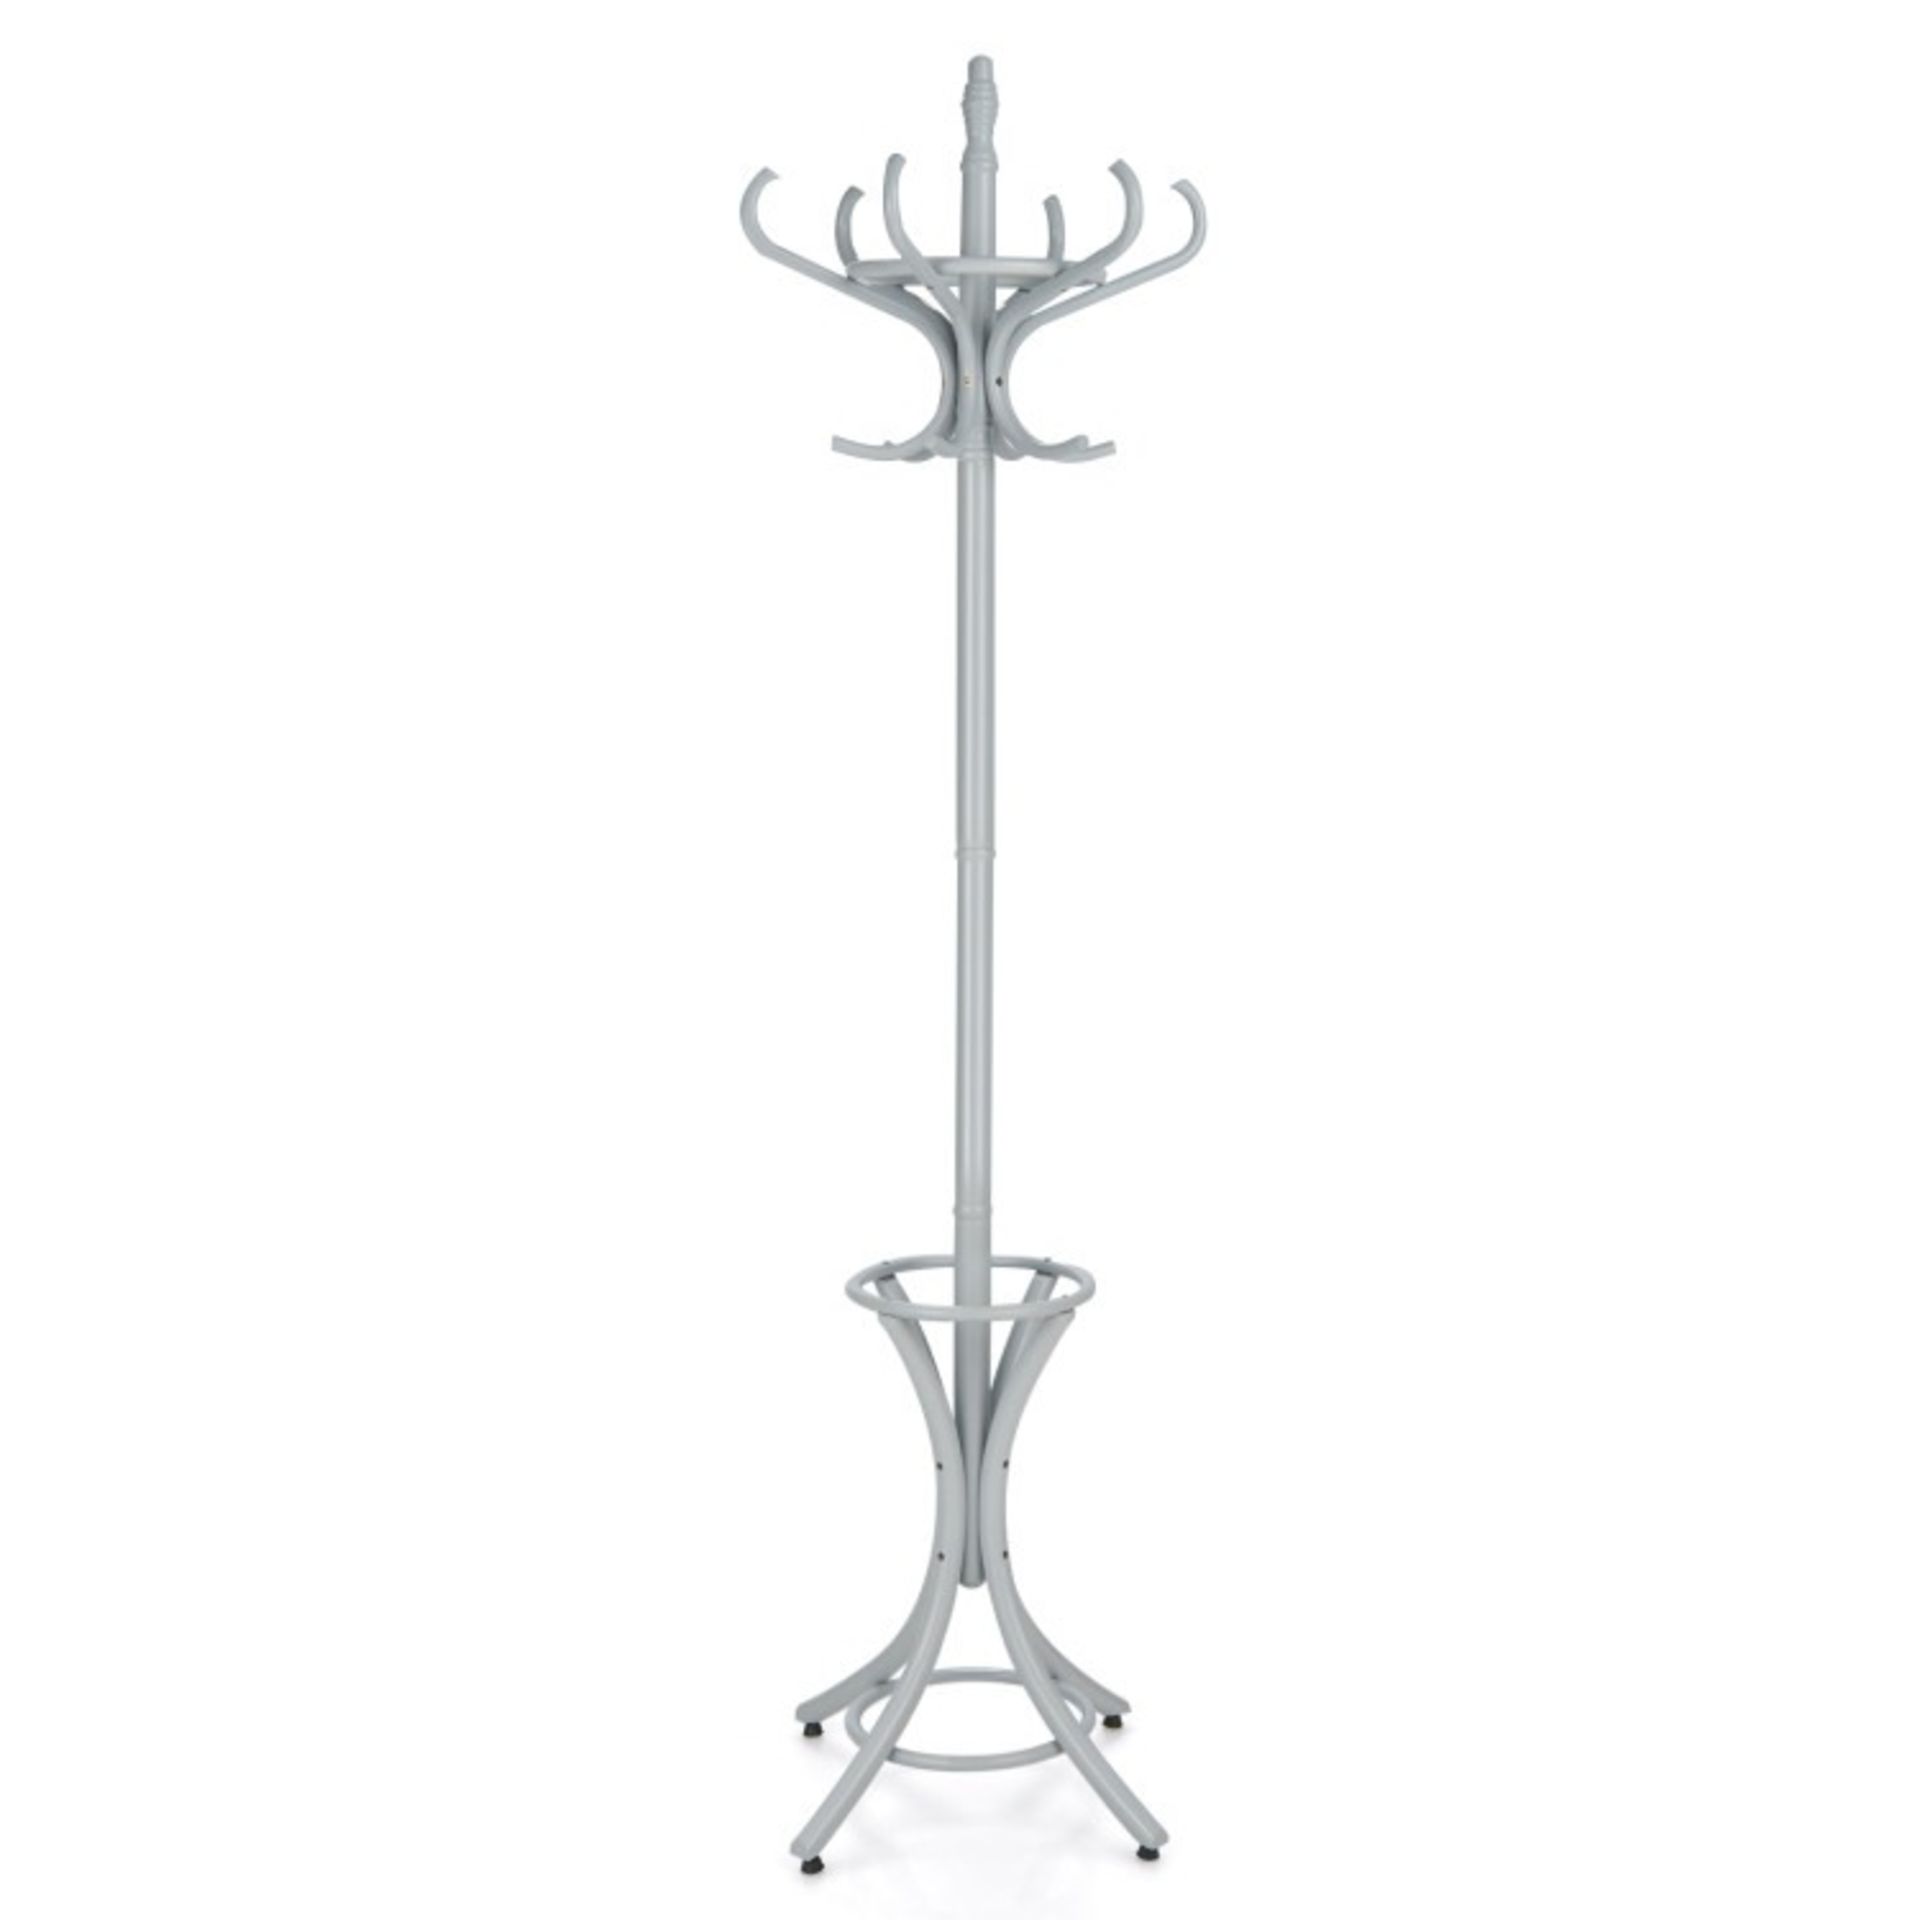 Wooden Standing Coat Rack Tree with 12 Hooks and Umbrella Stand Grey - ER54